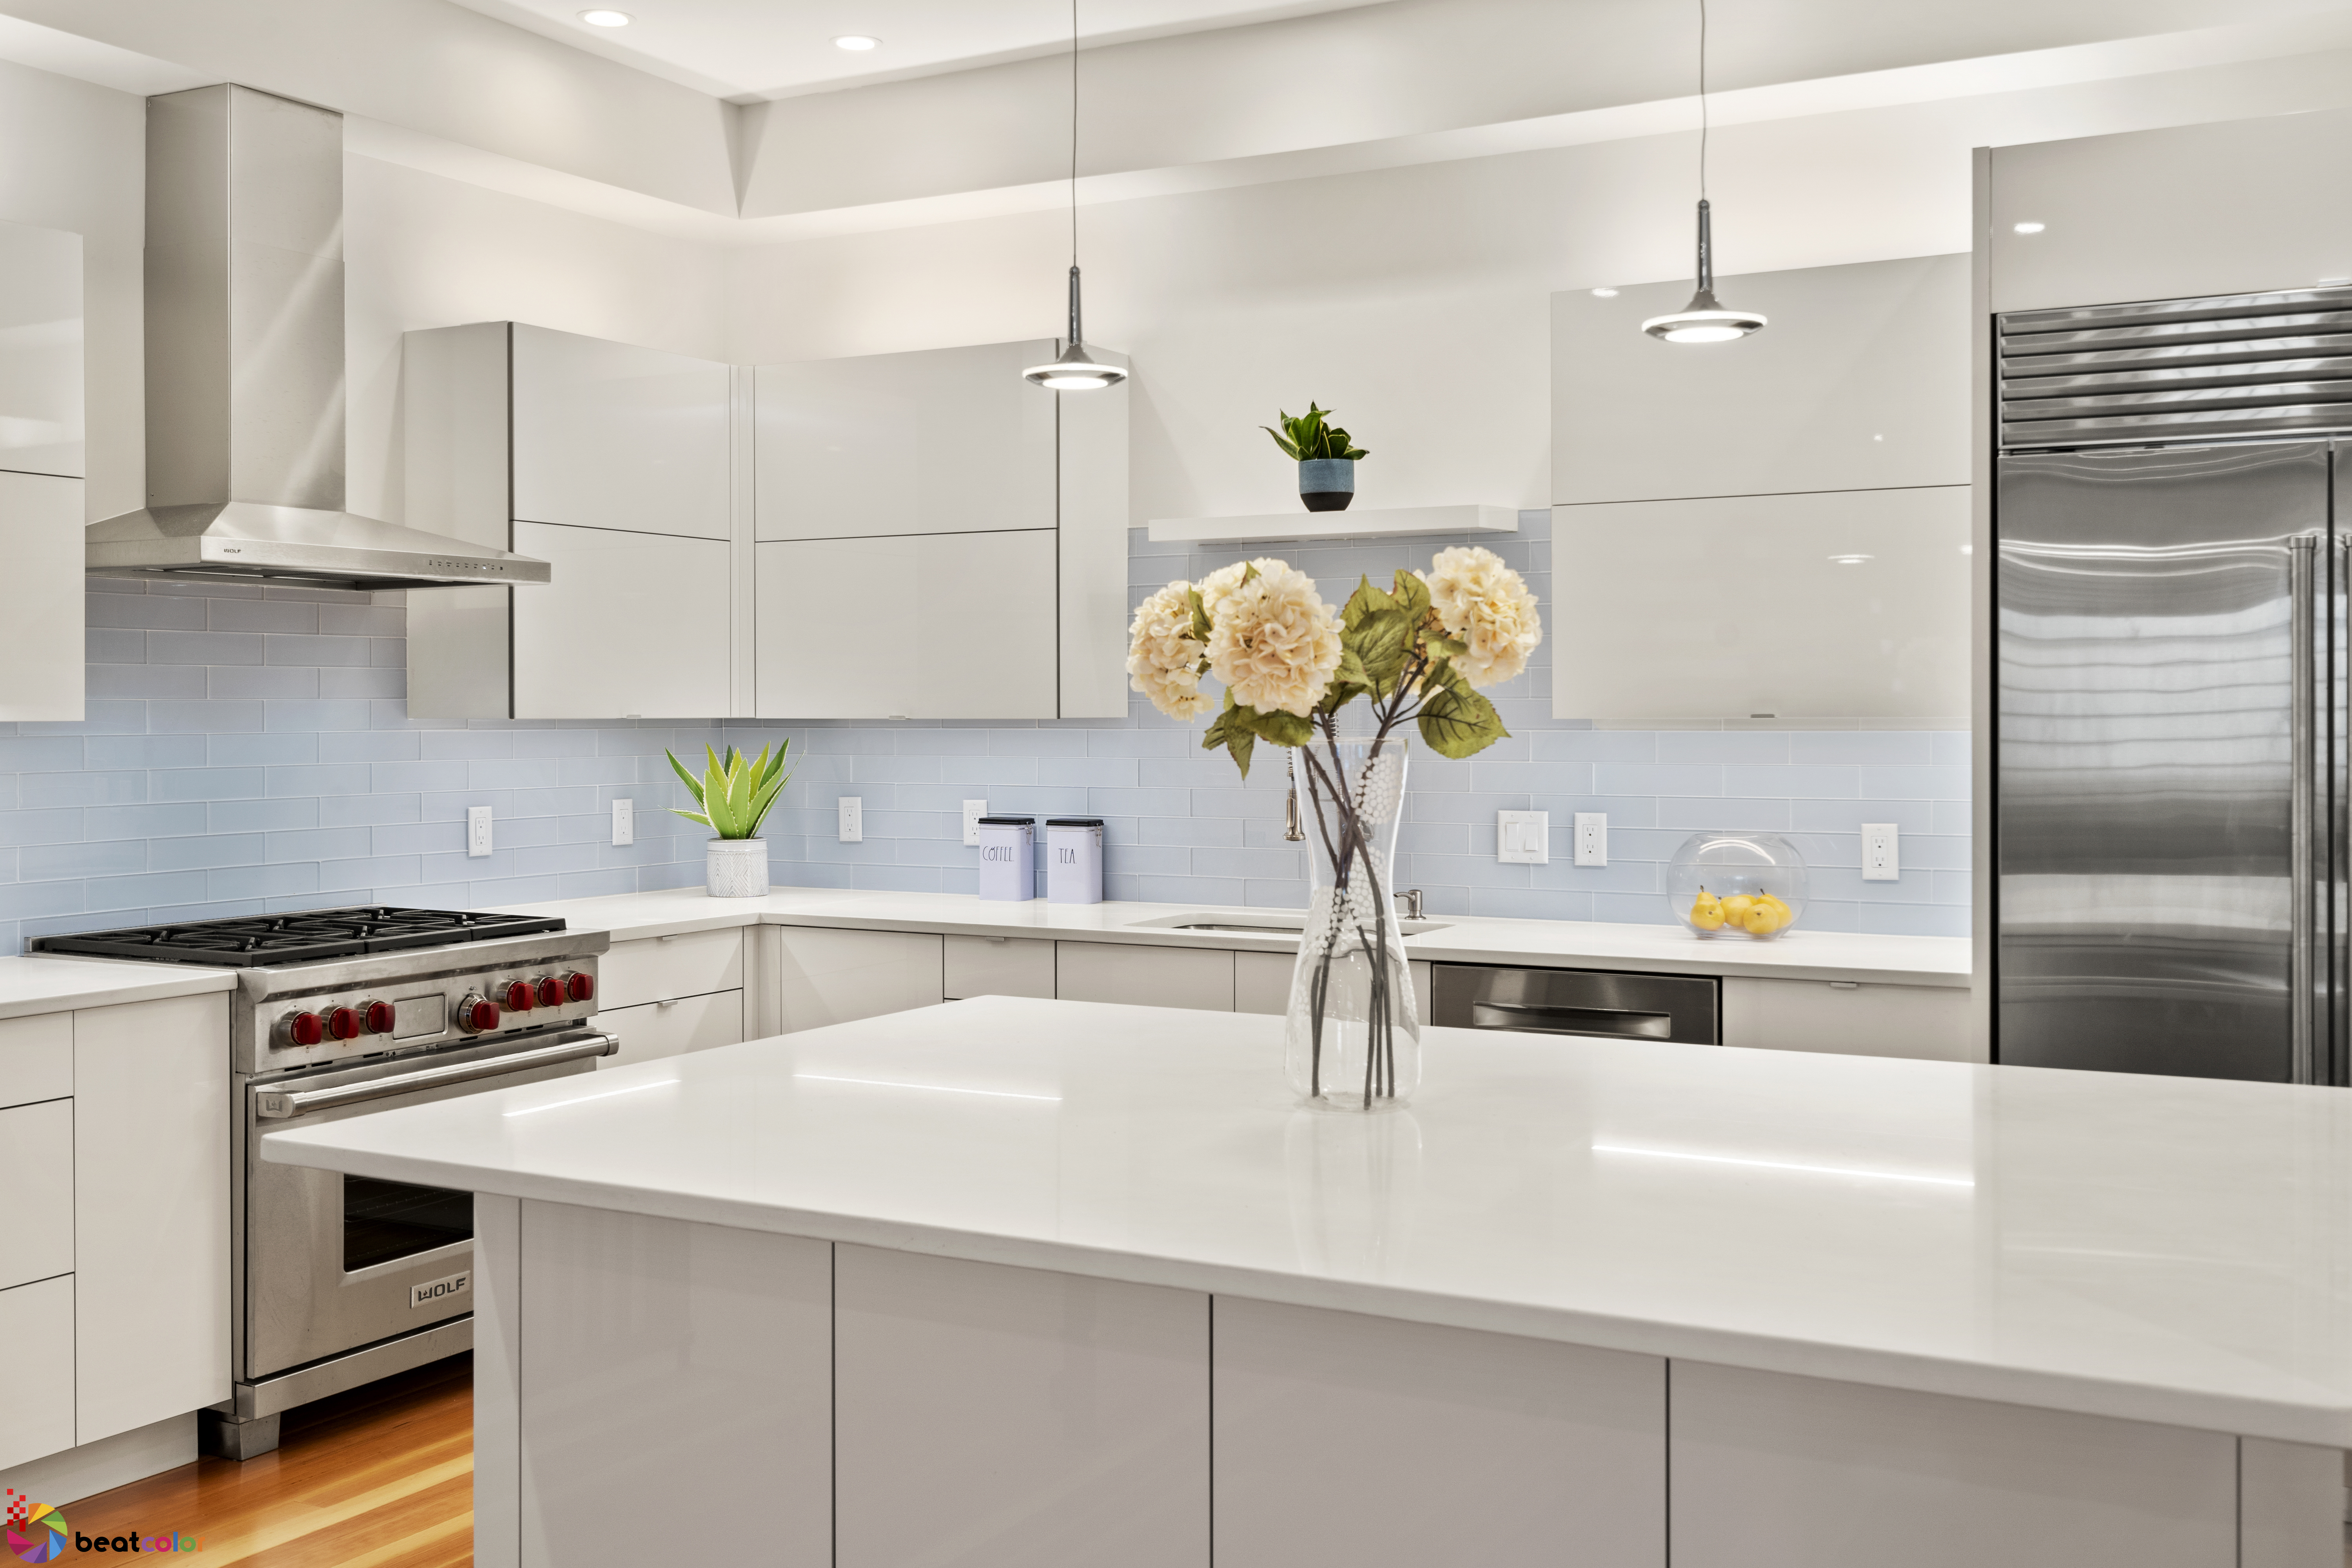 6 Tips to Upgrade Your Kitchen to Wow Your Home Buyers